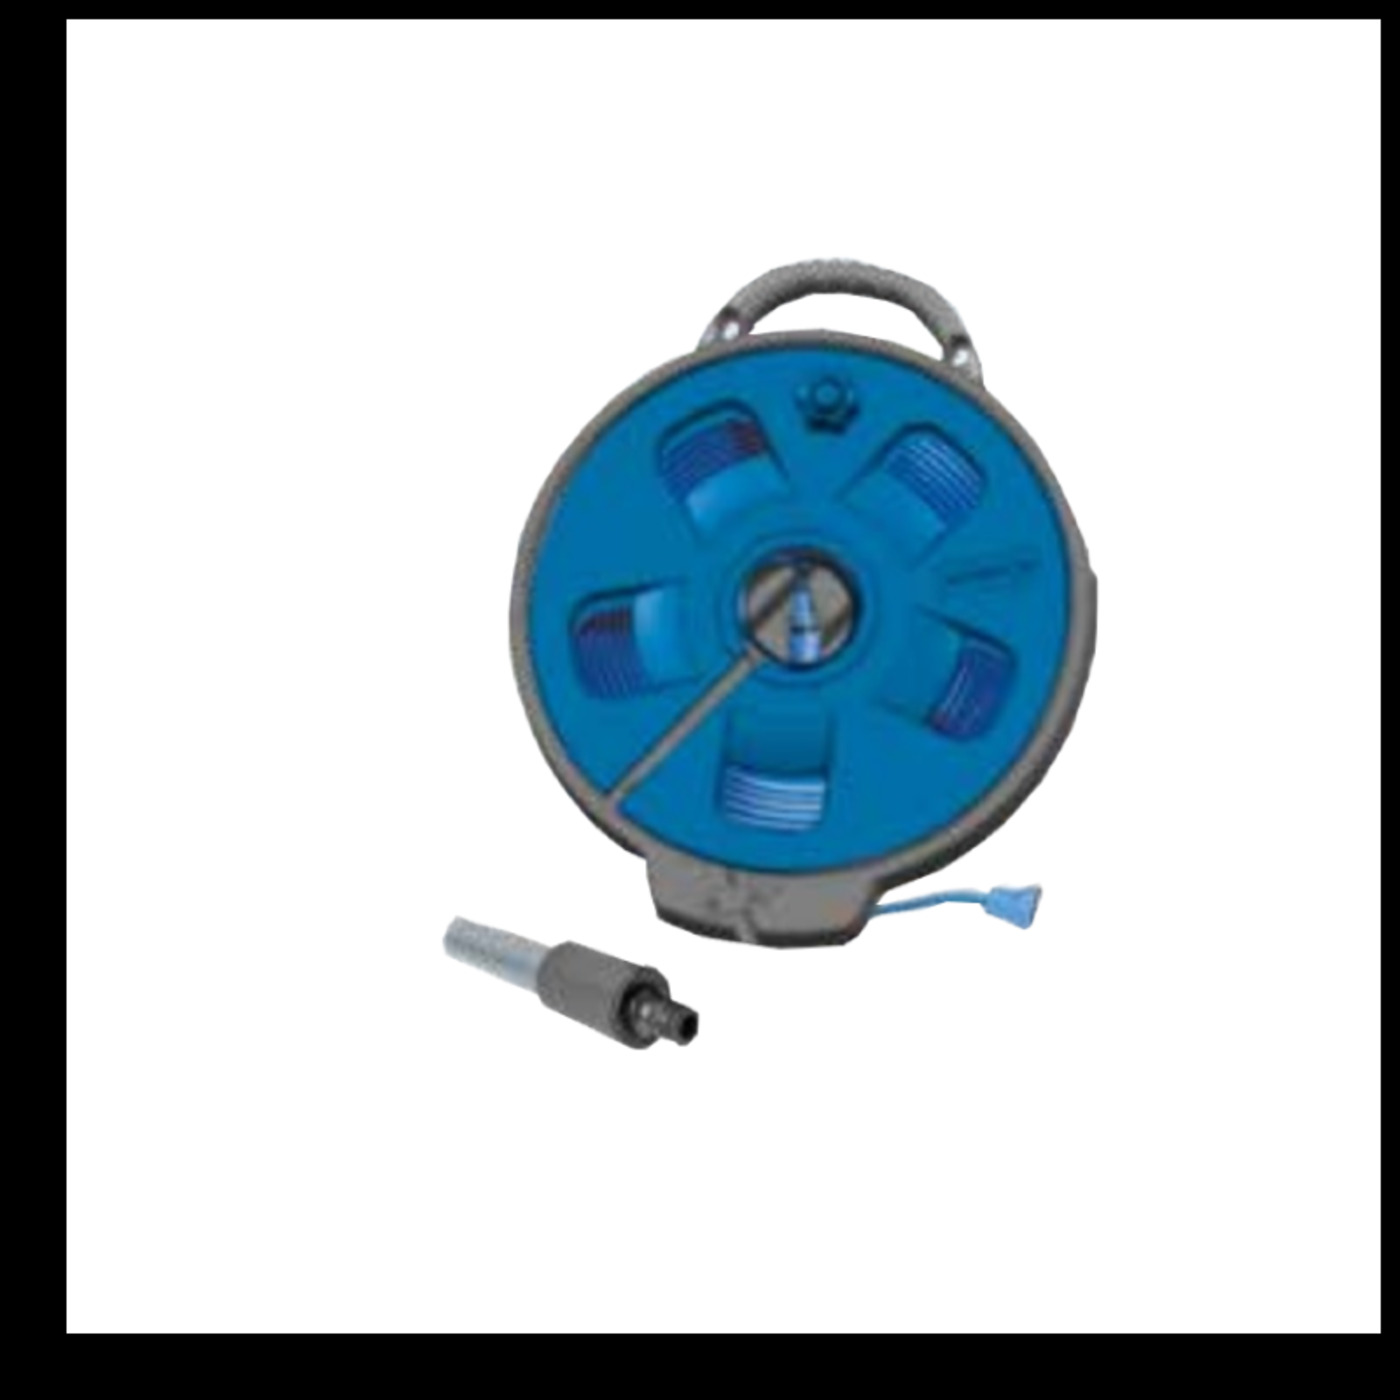 Flat Out 15m Drinking Water Hose on Electric Blue Reel with new